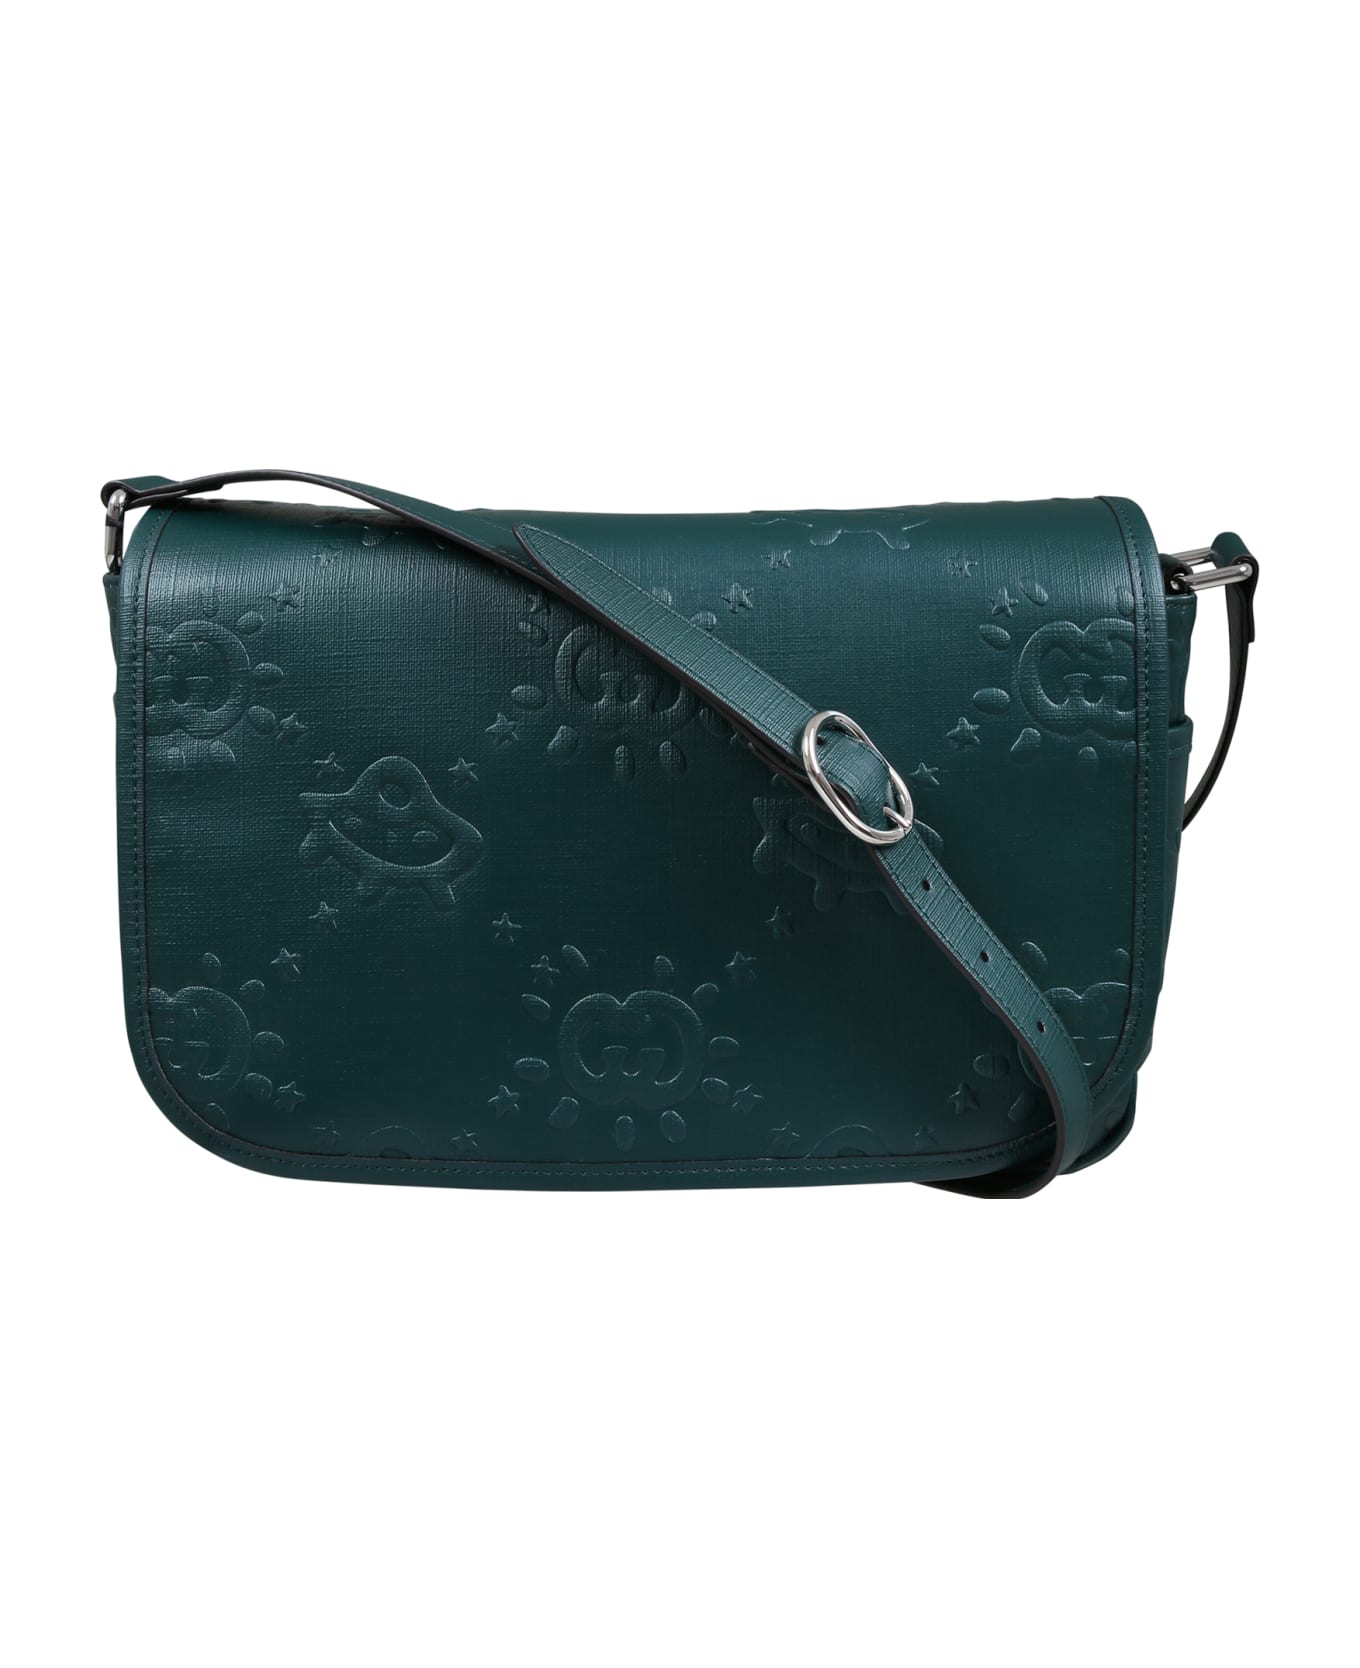 Gucci Green Bag For Girl With Gg Cross - Green アクセサリー＆ギフト